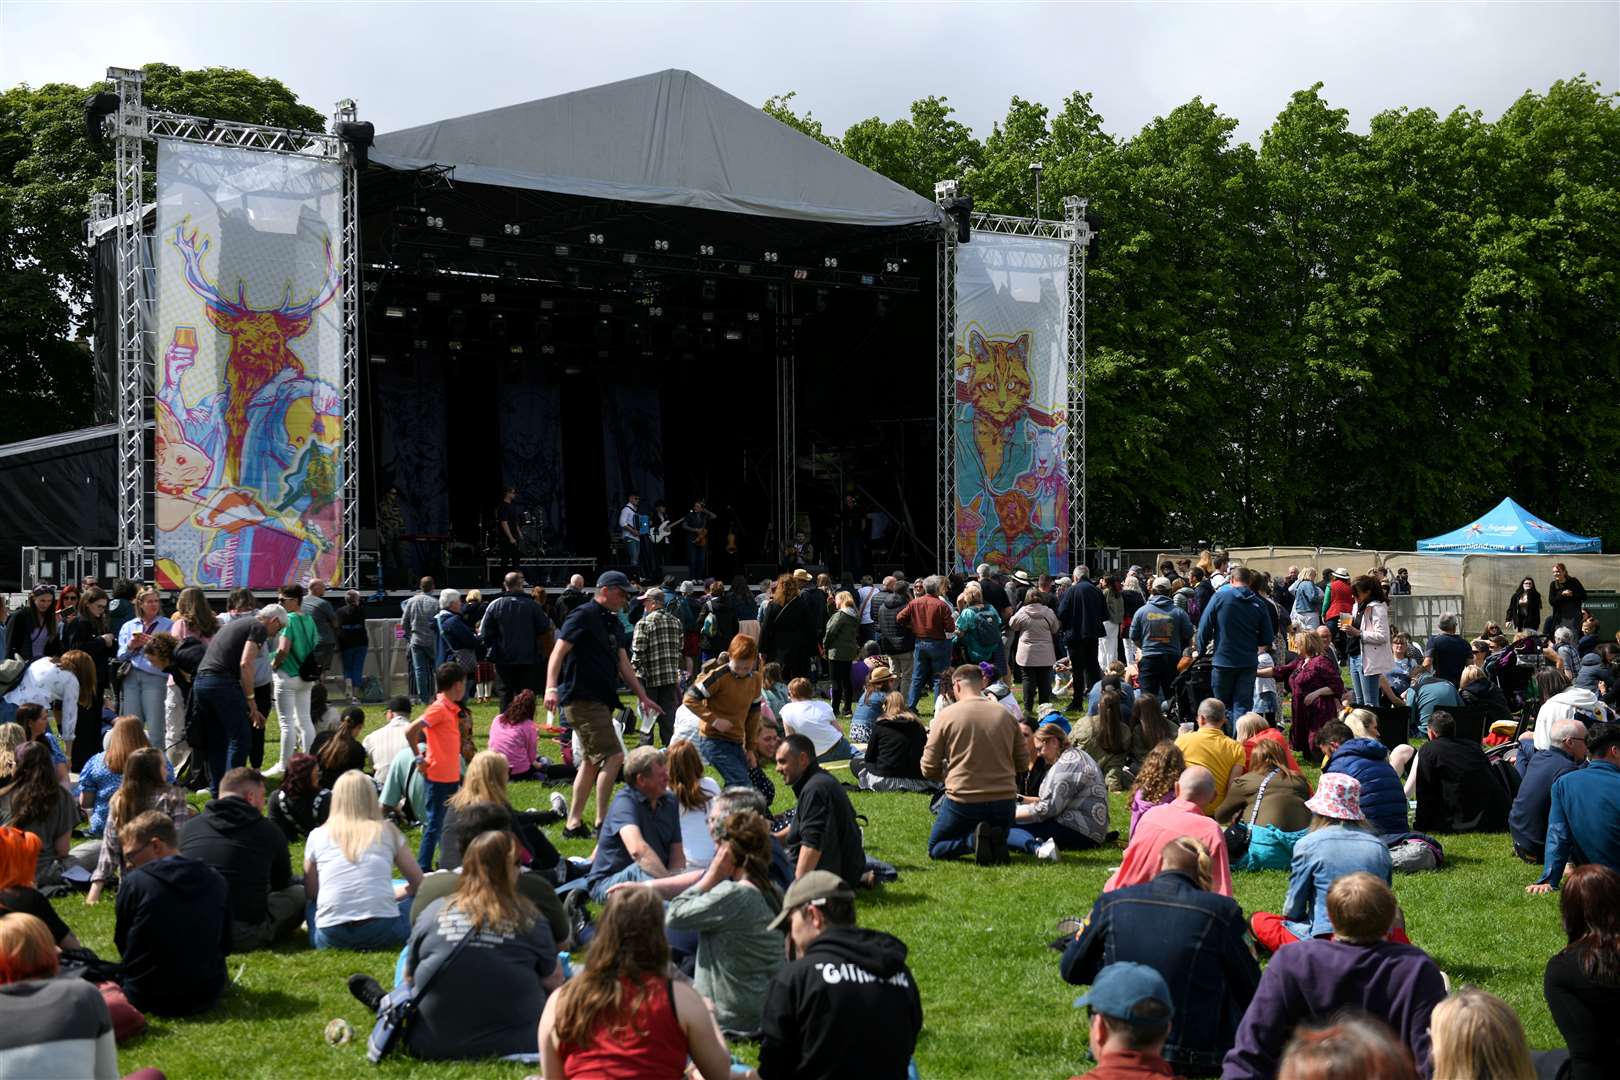 The sun shining as the crowd relaxed at the main stage.